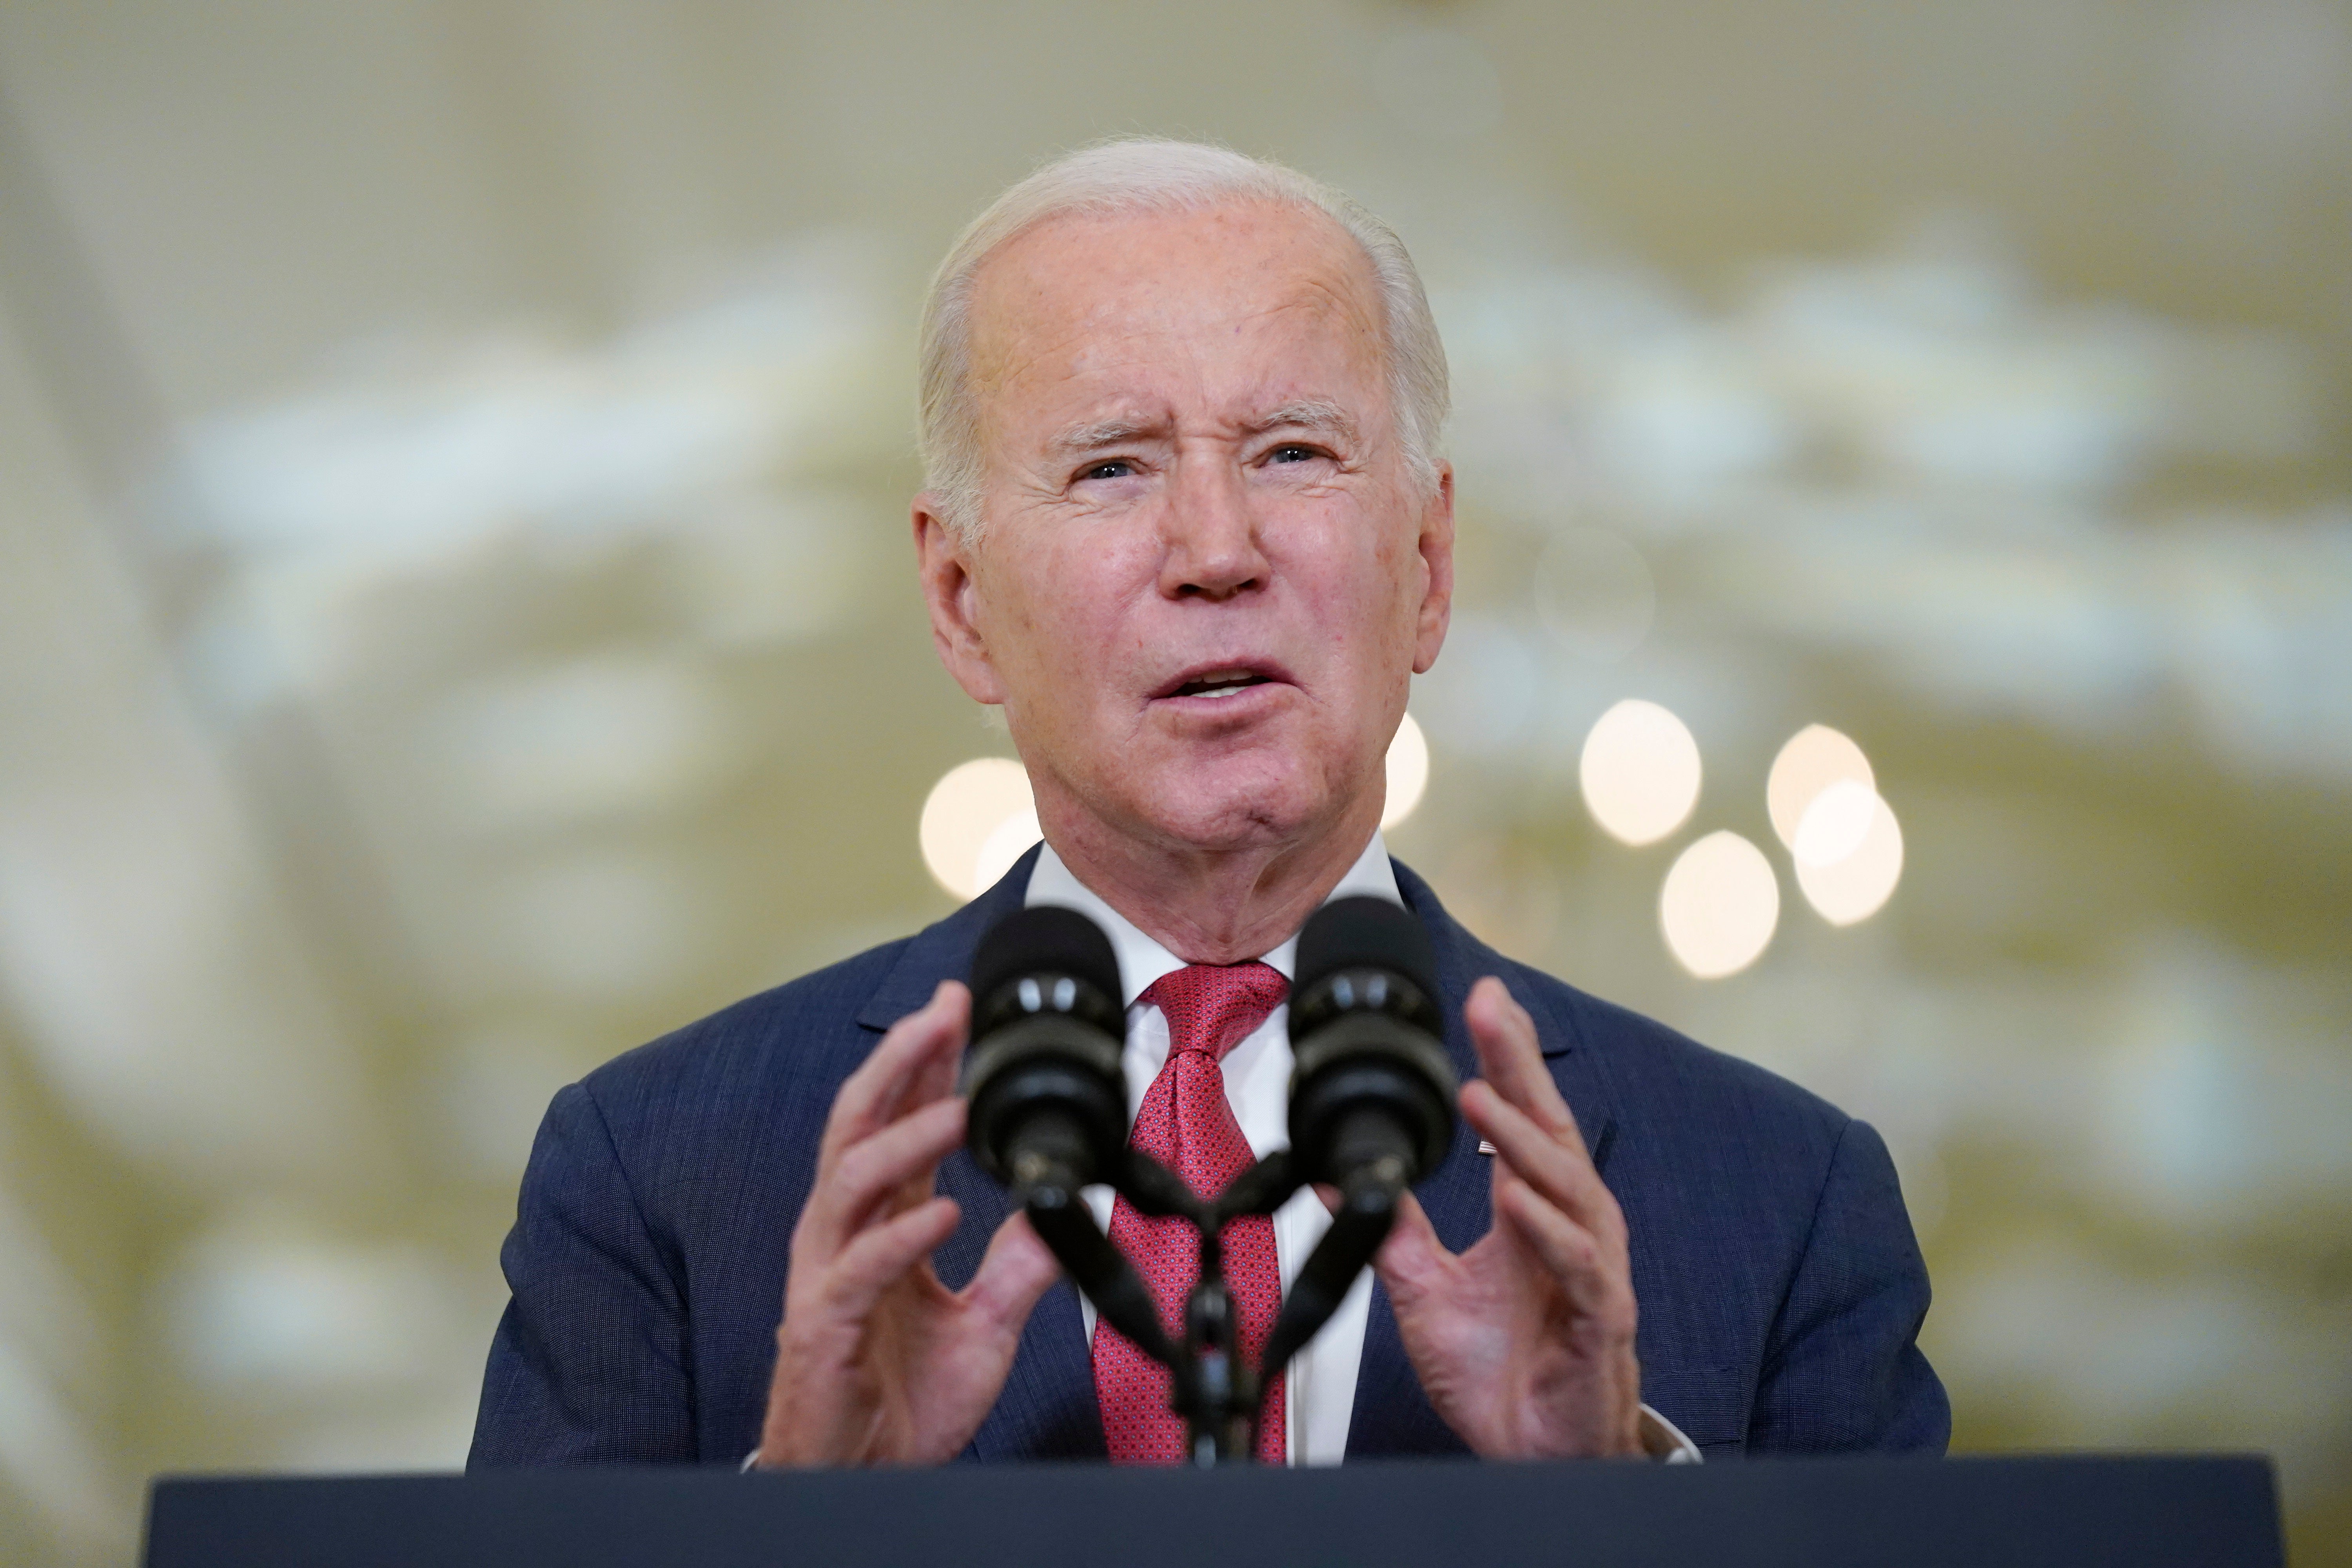 Joe Biden issued pardons for six ex-prisoners who have since become active members of their communities